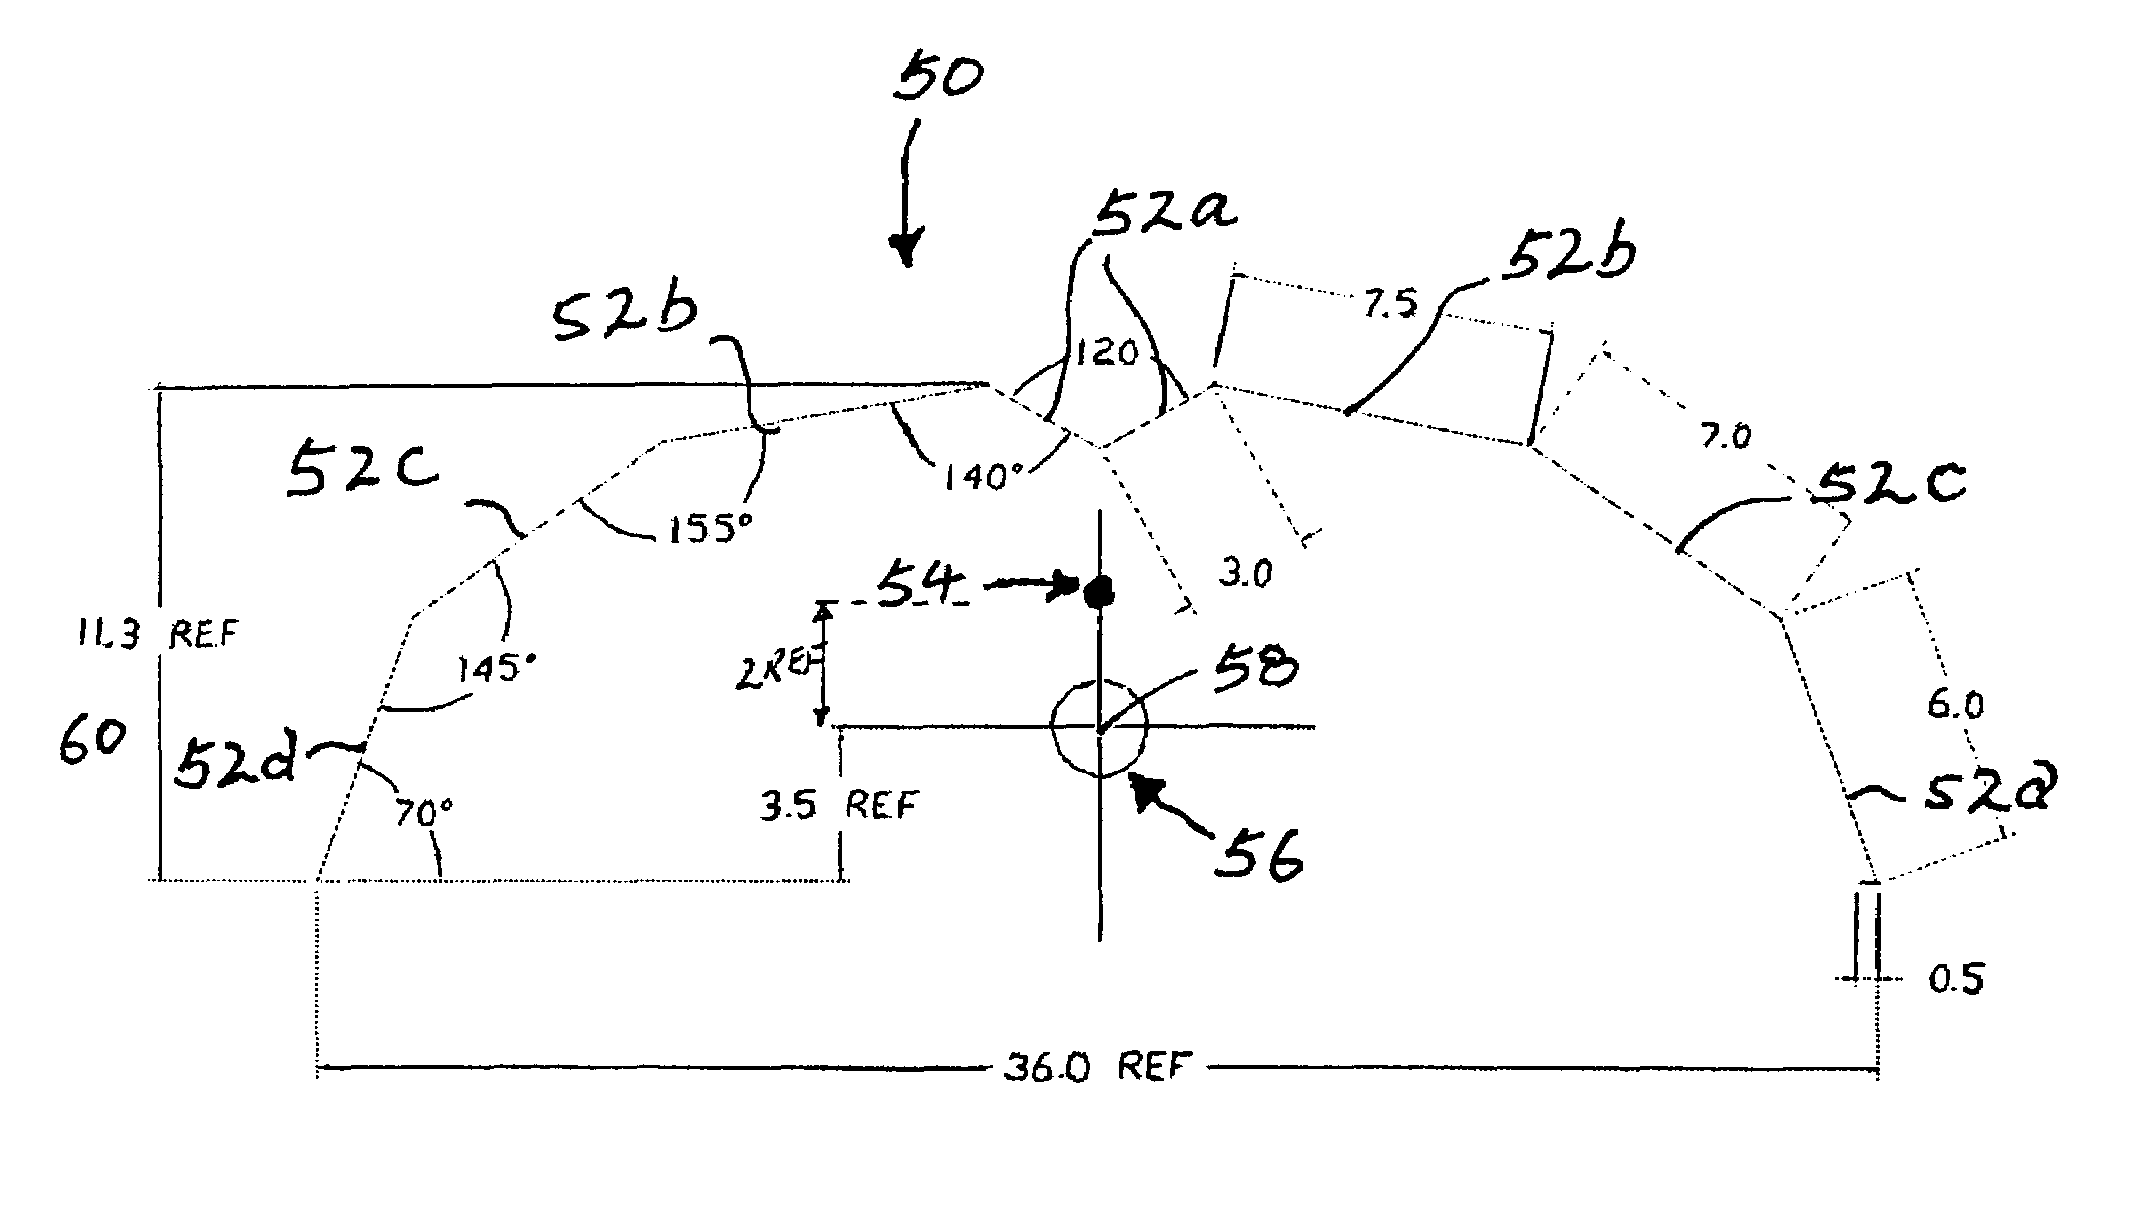 Energy efficient lighting apparatus and use thereof